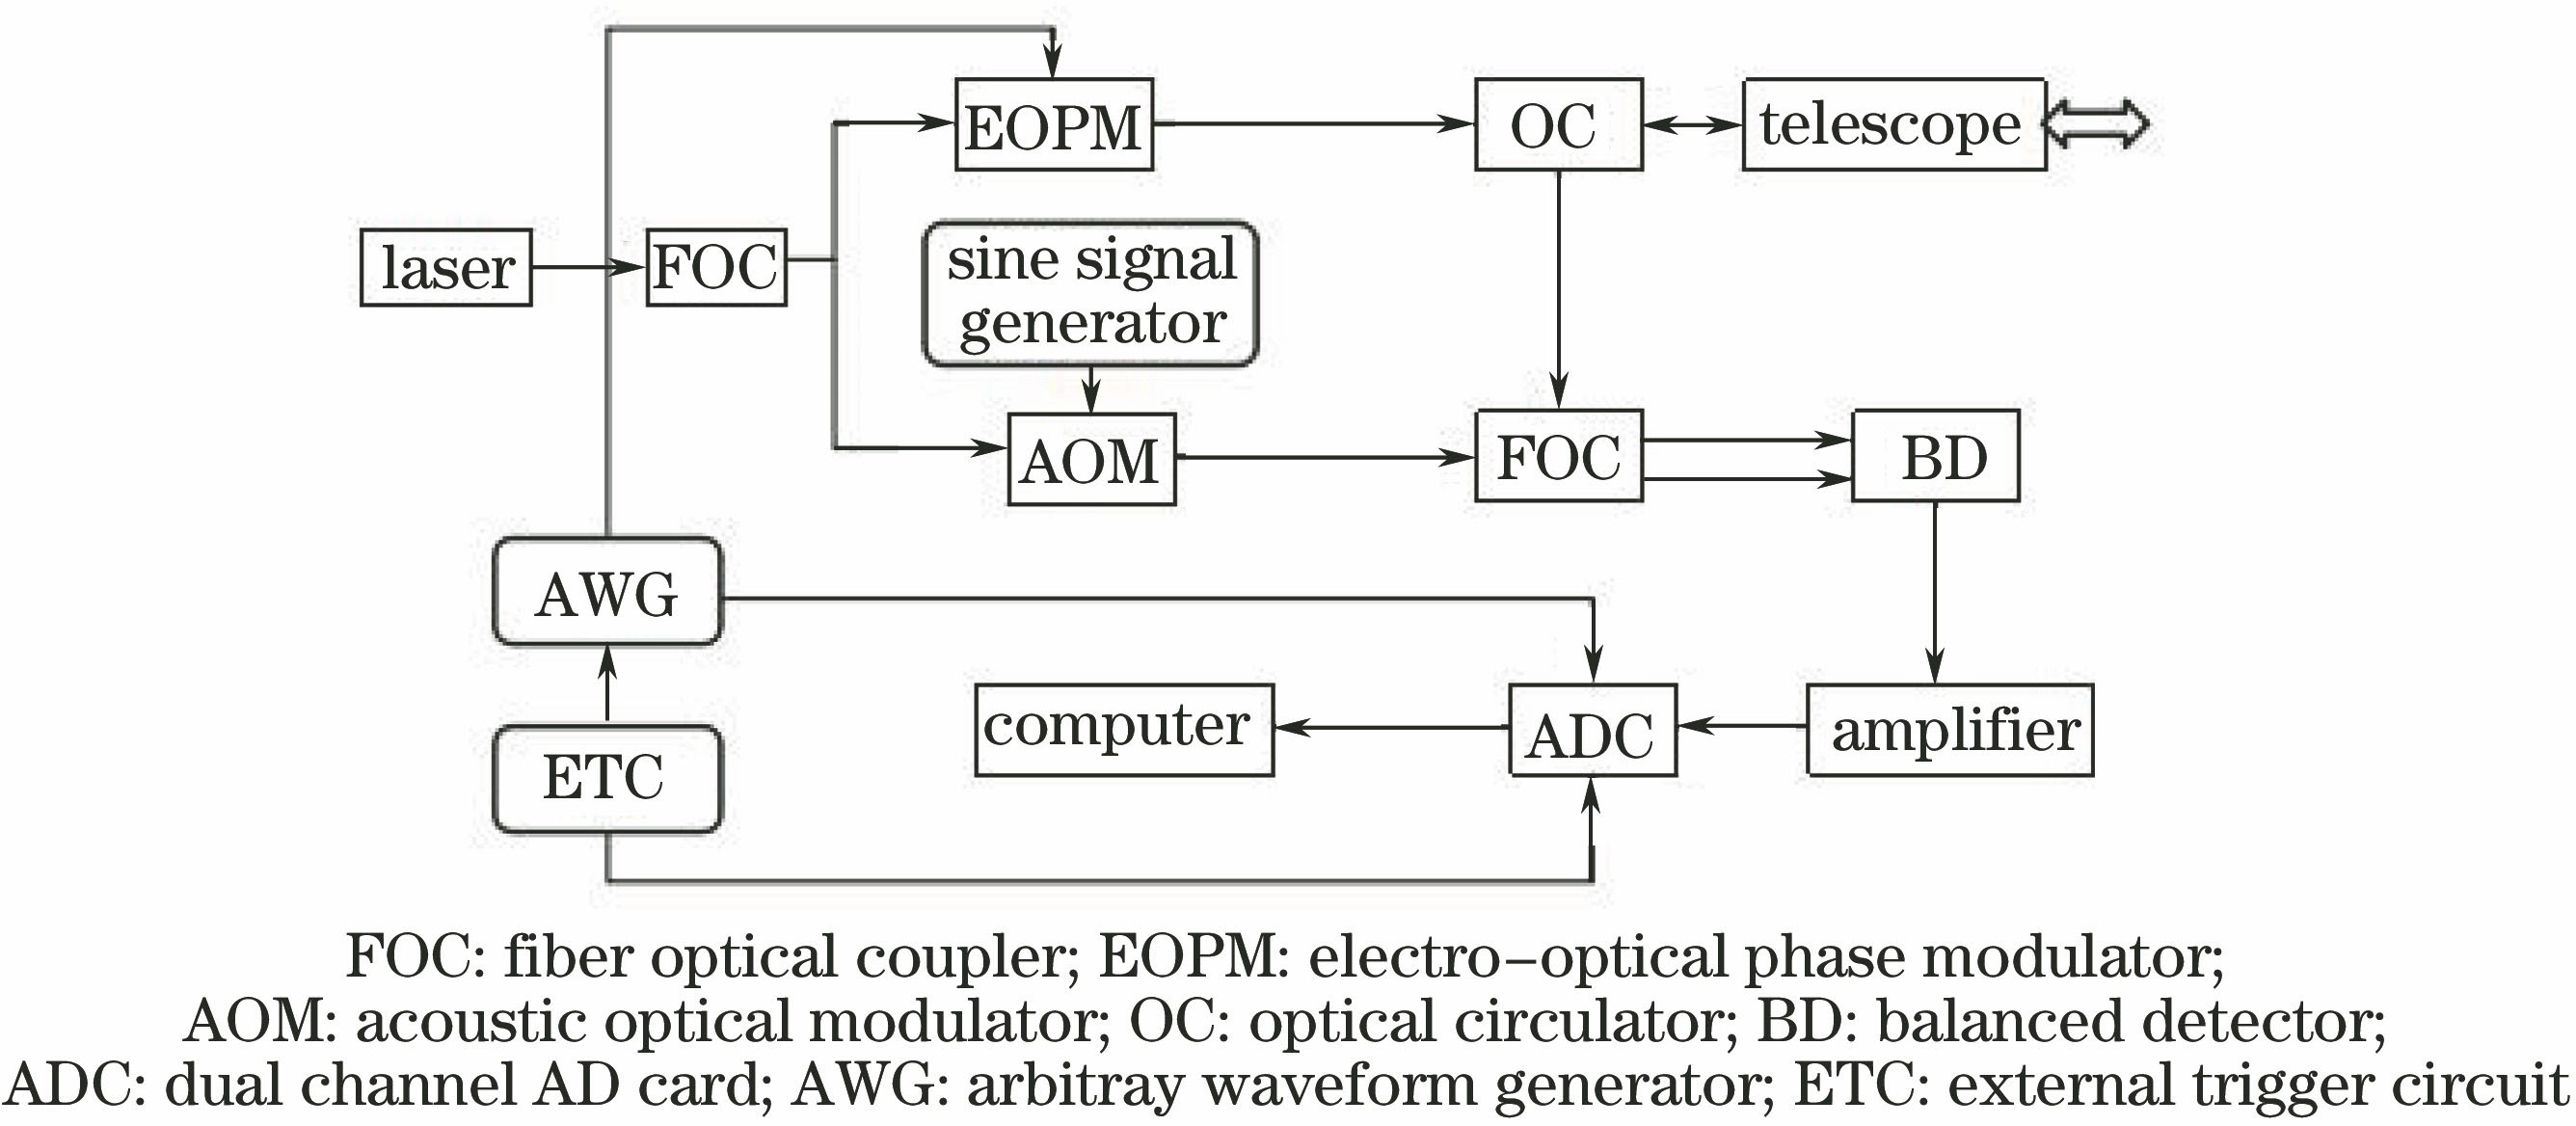 Schematic of the laser ranging system based on the PRC phase modulation and coherent detection